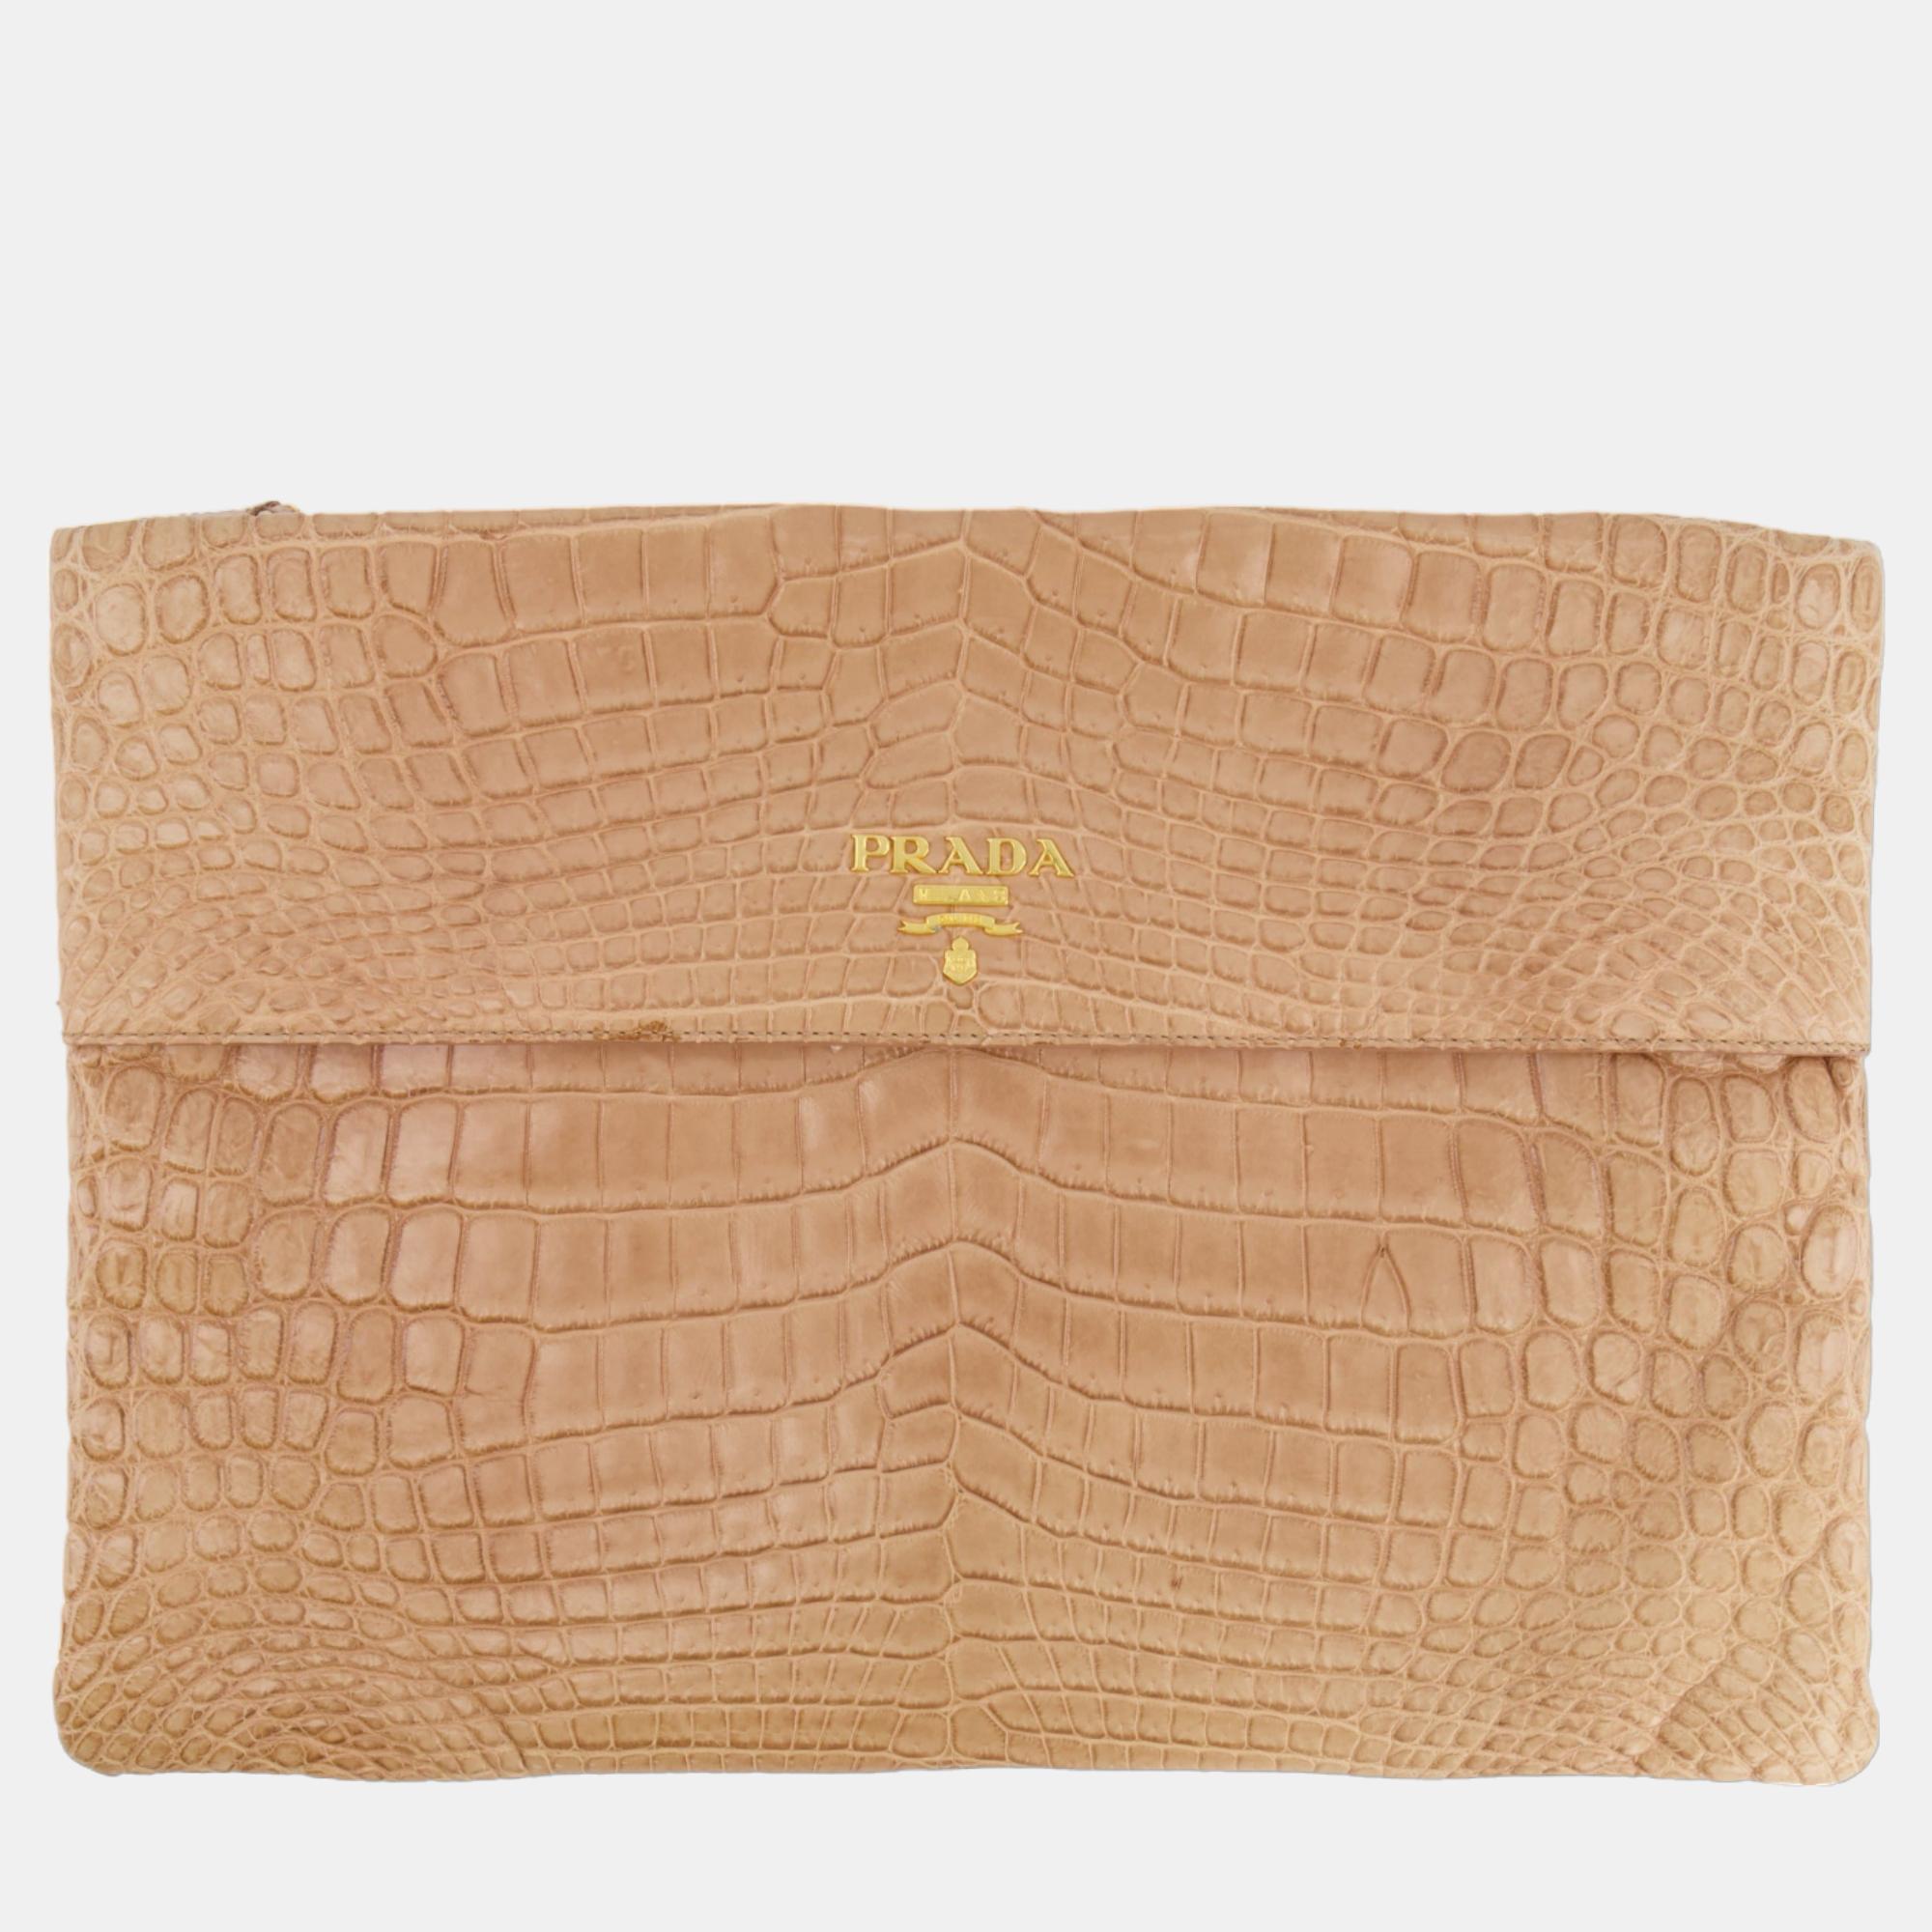 Prada beige crocodile large pouch bag with gold hardware